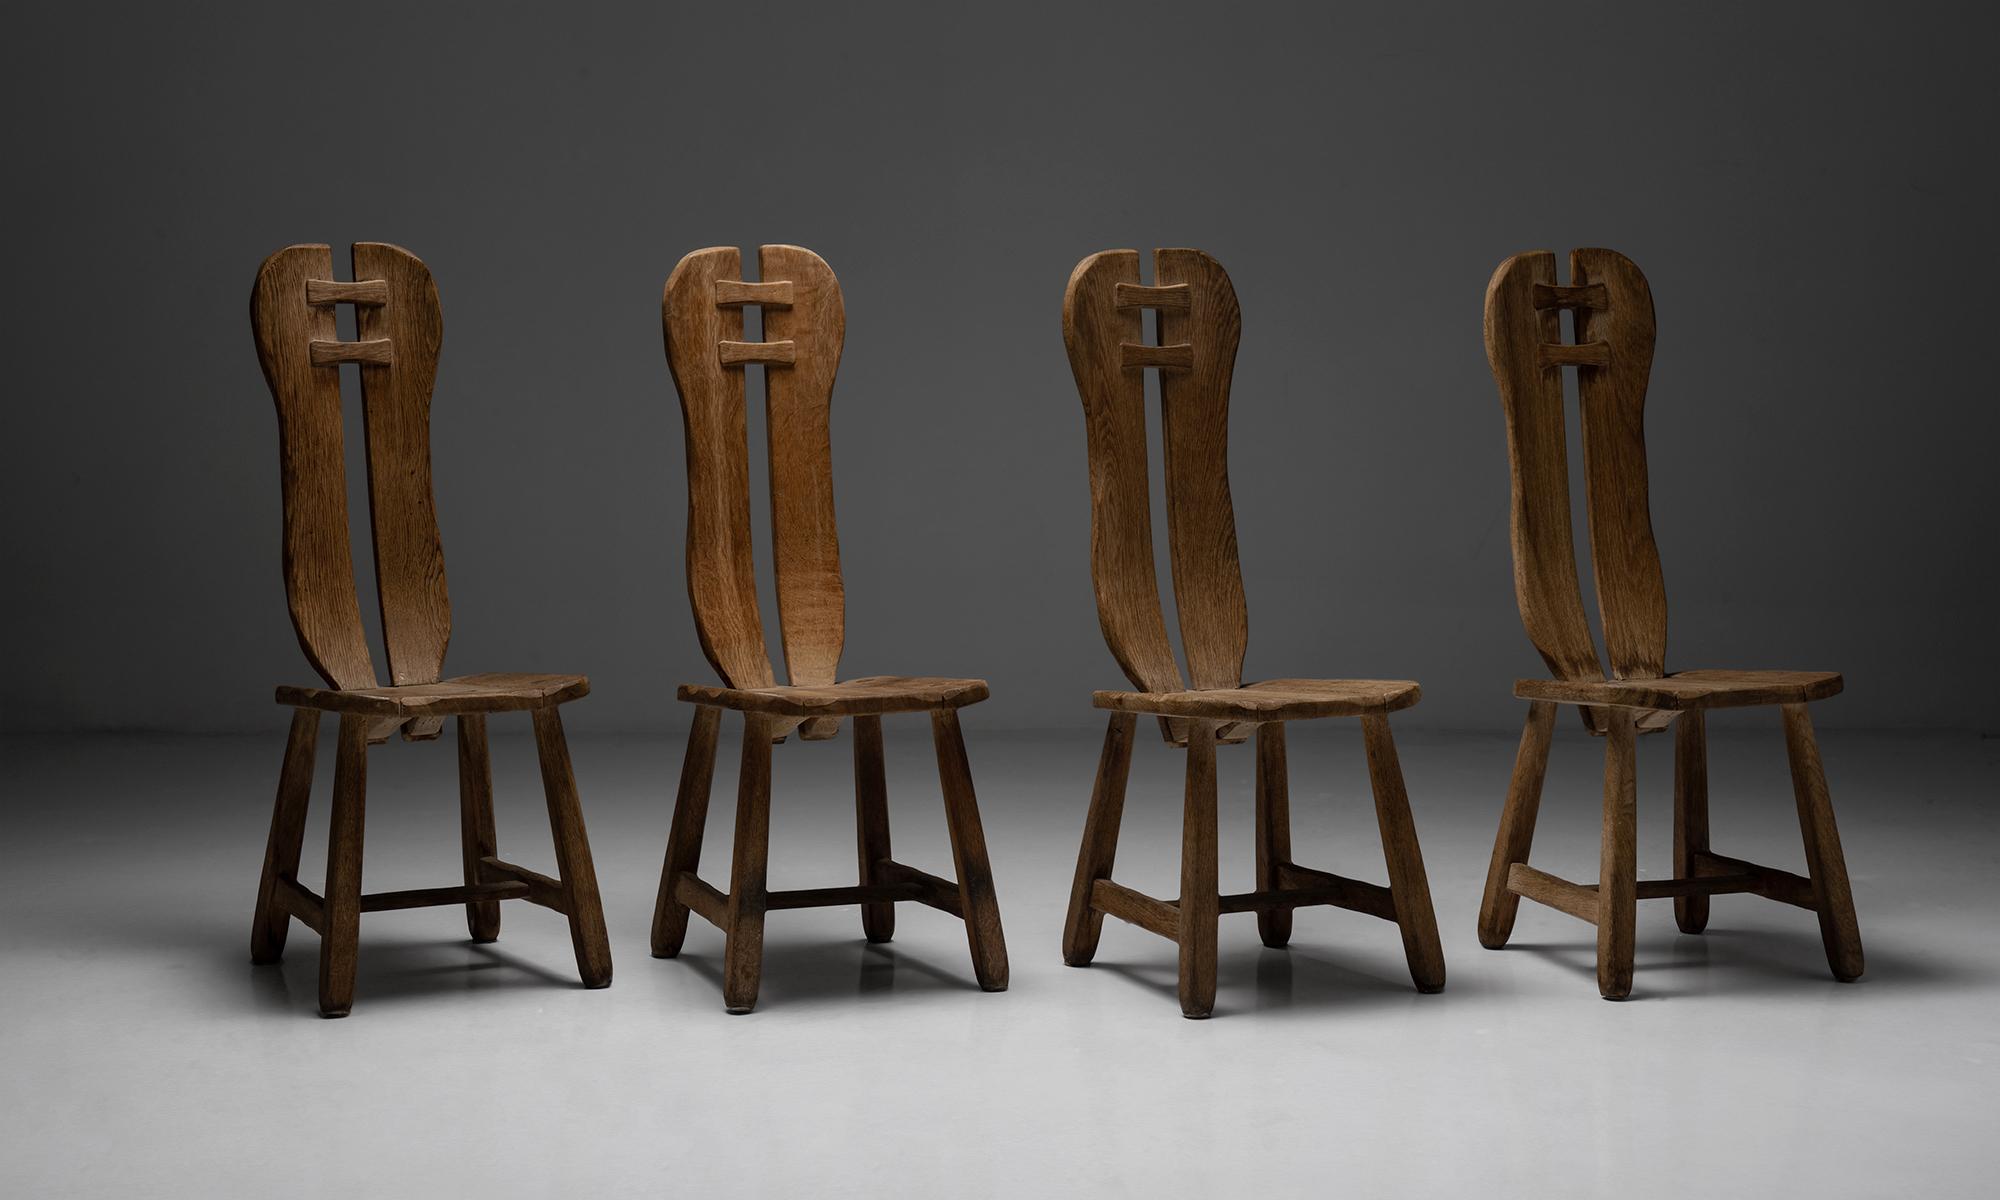 De Puydt dining chairs

Belgium Circa 1970

Brutalist dining chairs constructed in oak.